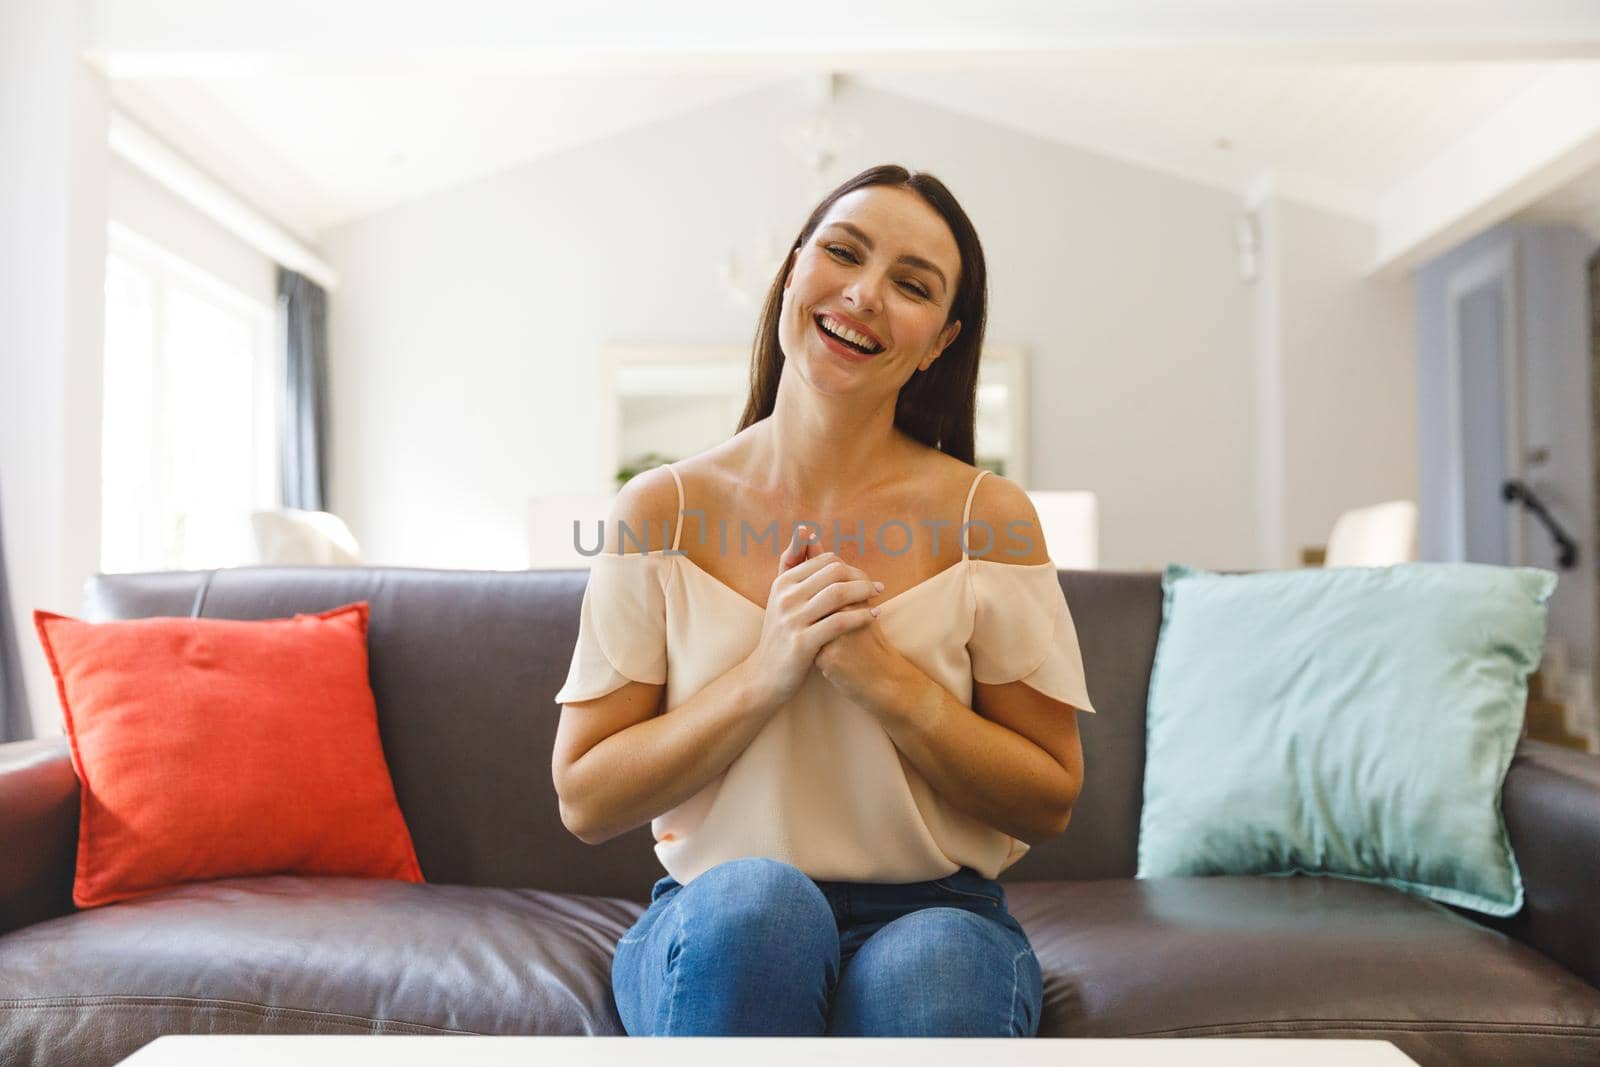 Caucasian woman sitting on couch having video call in living room, smiling by Wavebreakmedia